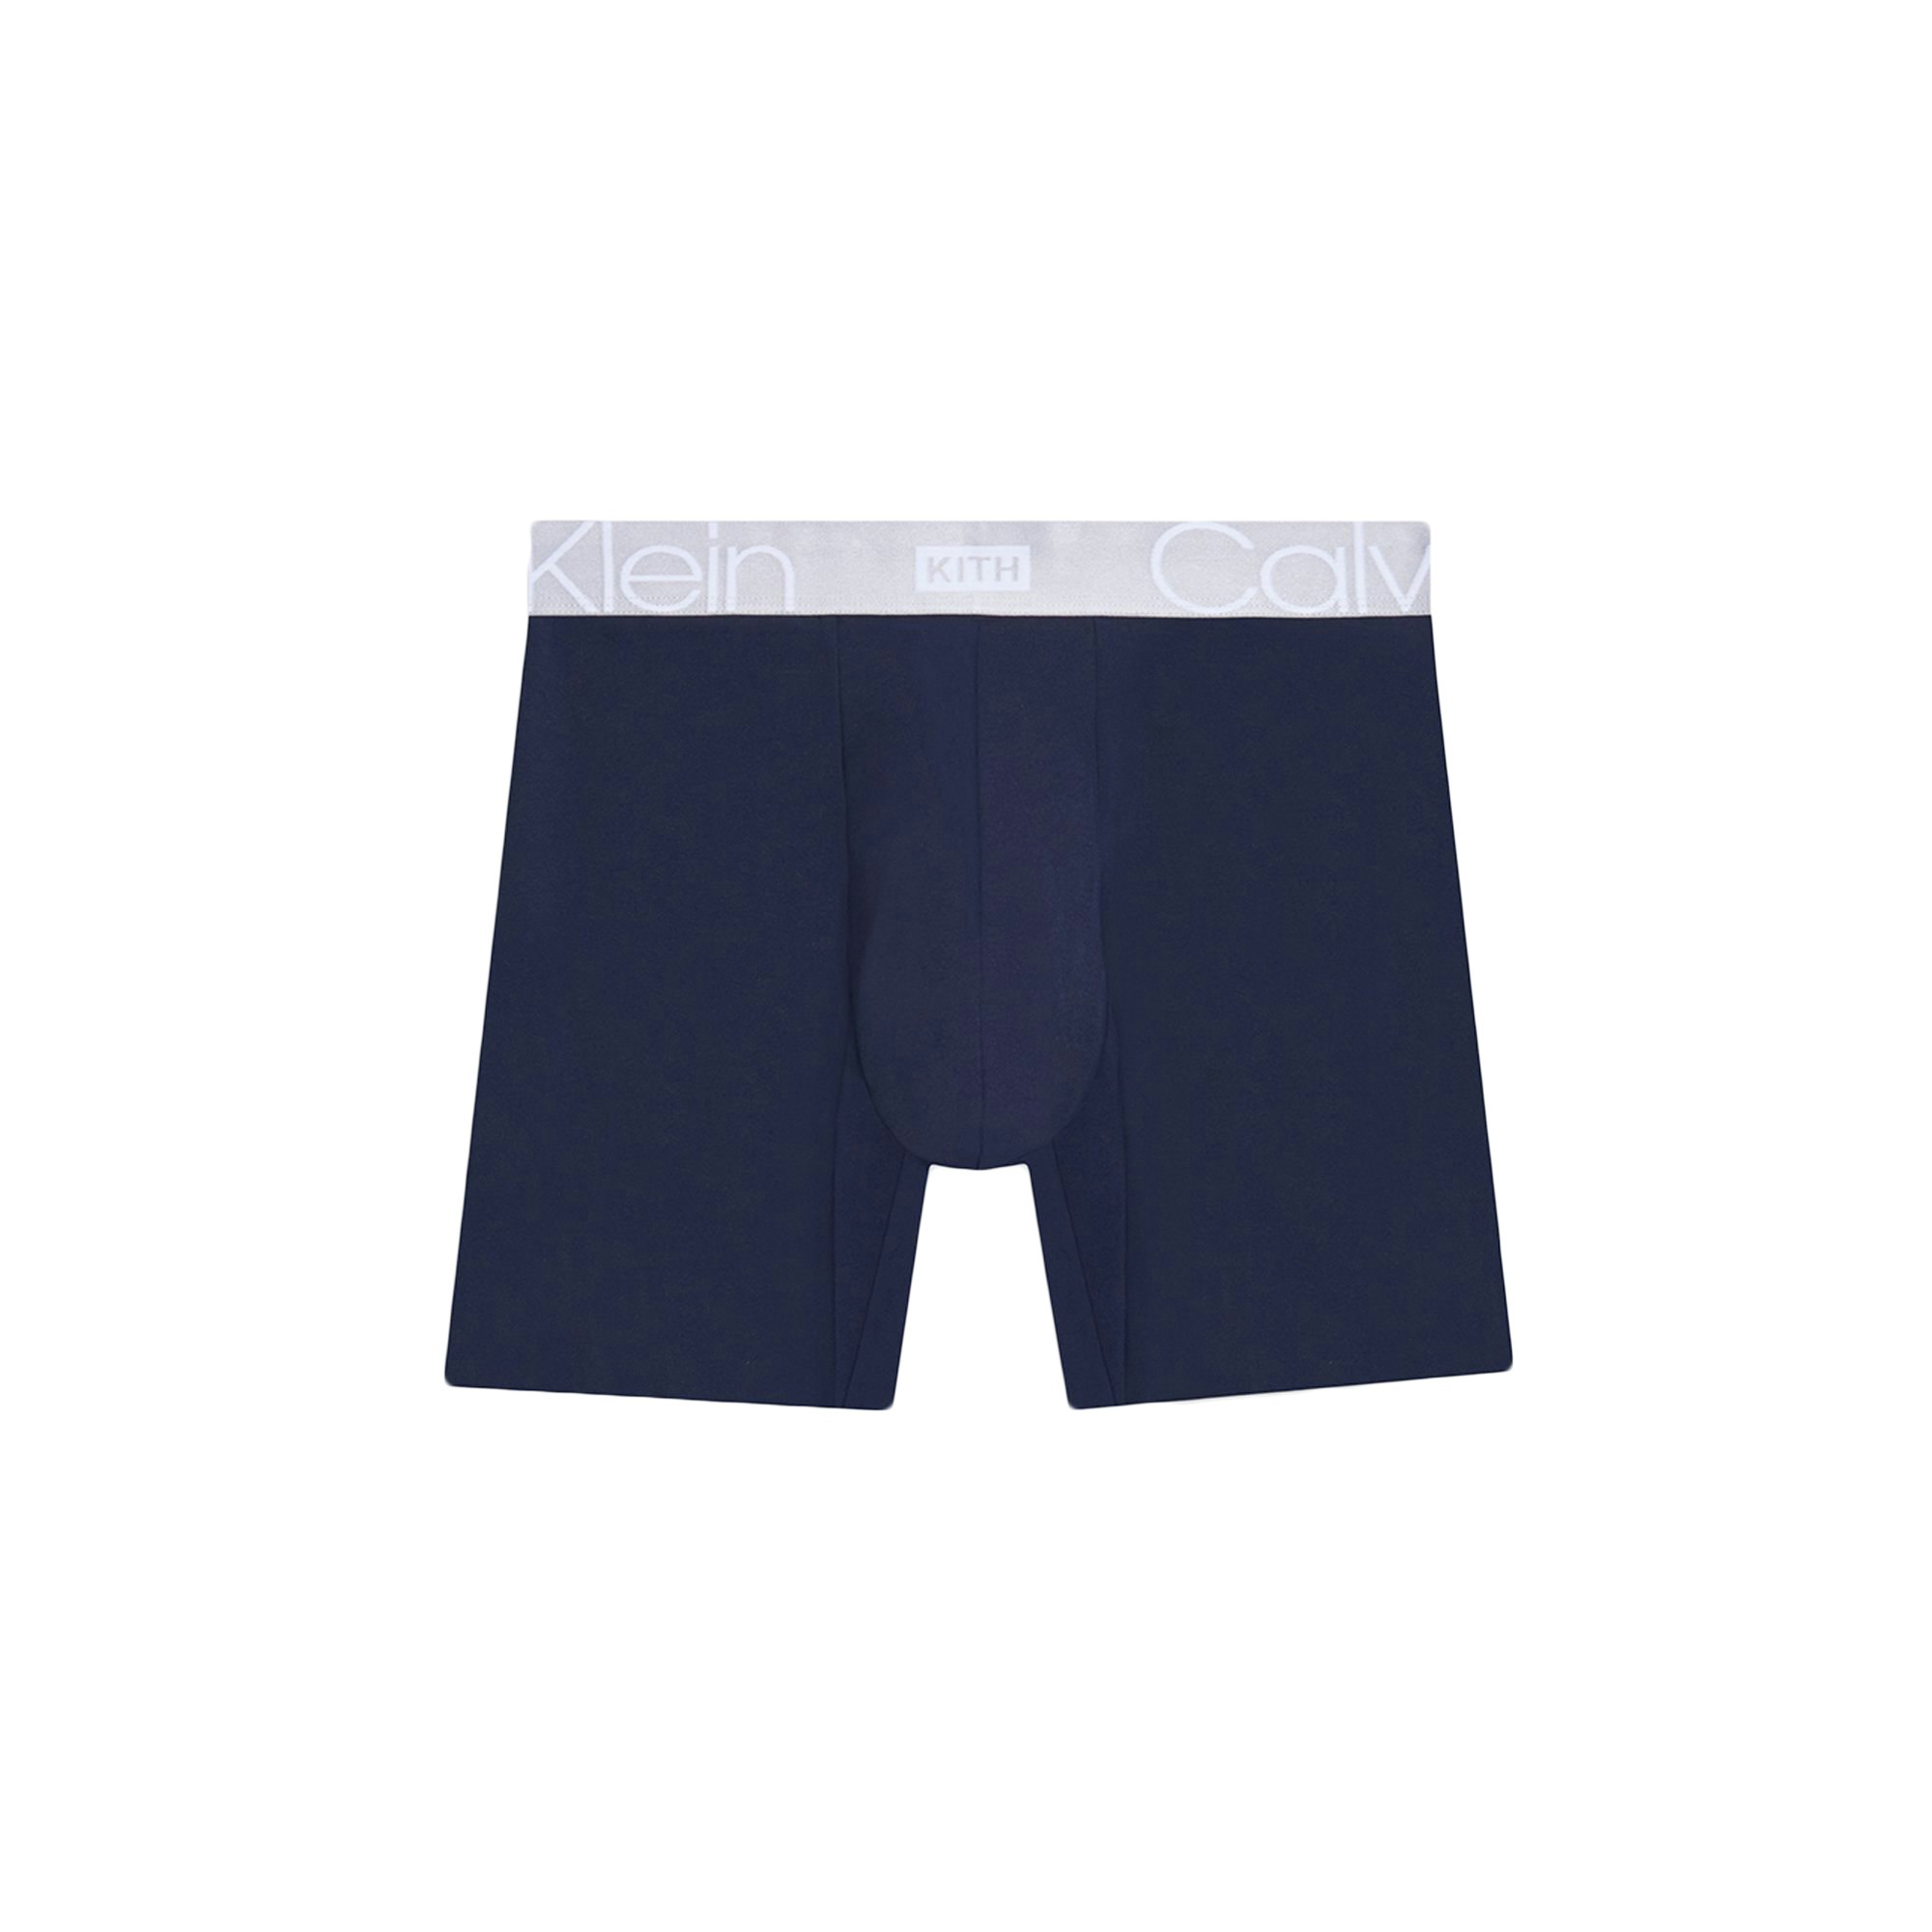 JUSTIN BOXER BRIEF by GBGB White/Blue